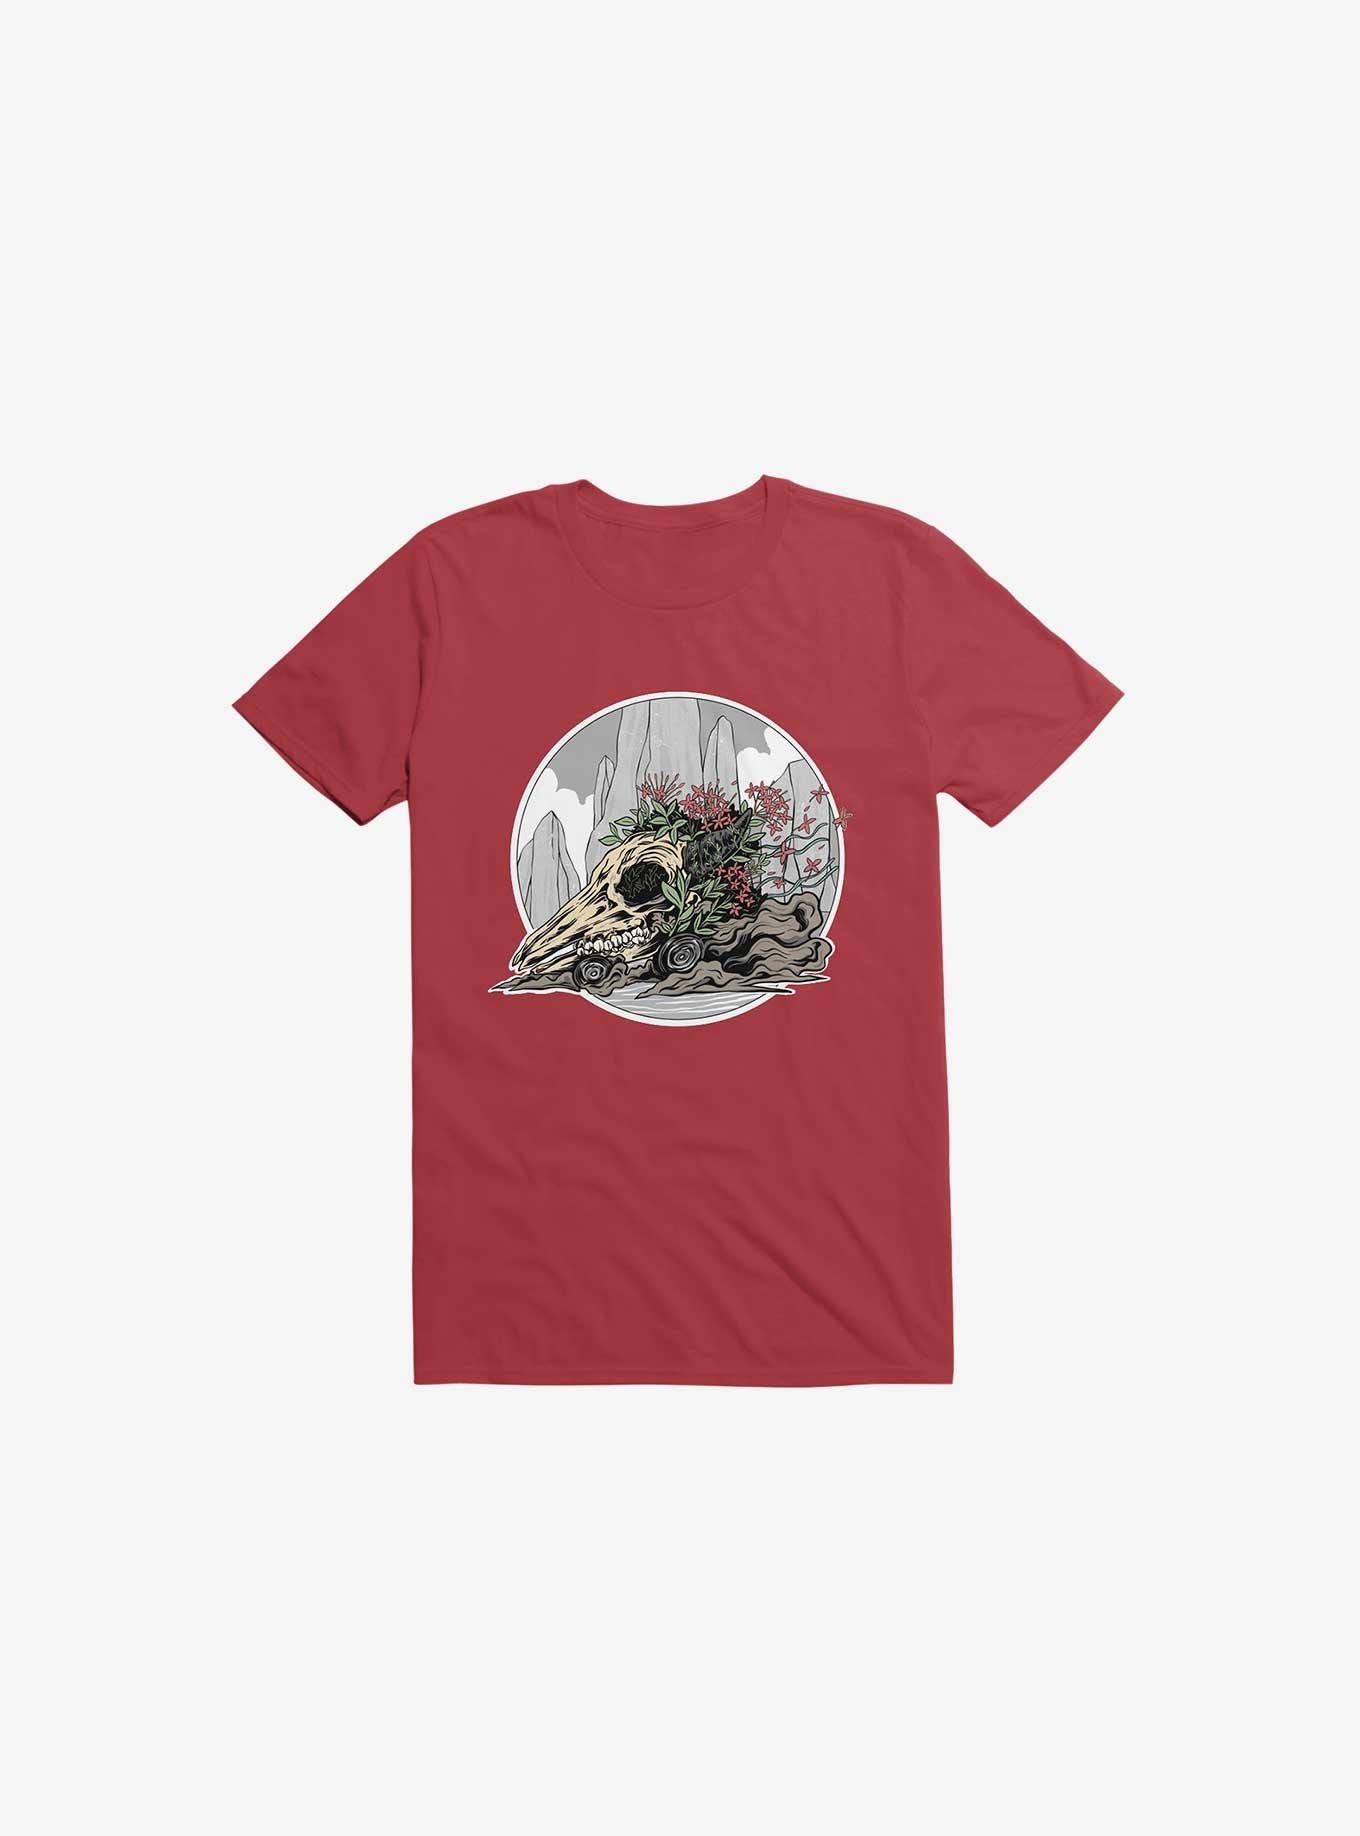 Race The Time Skull Red T-Shirt